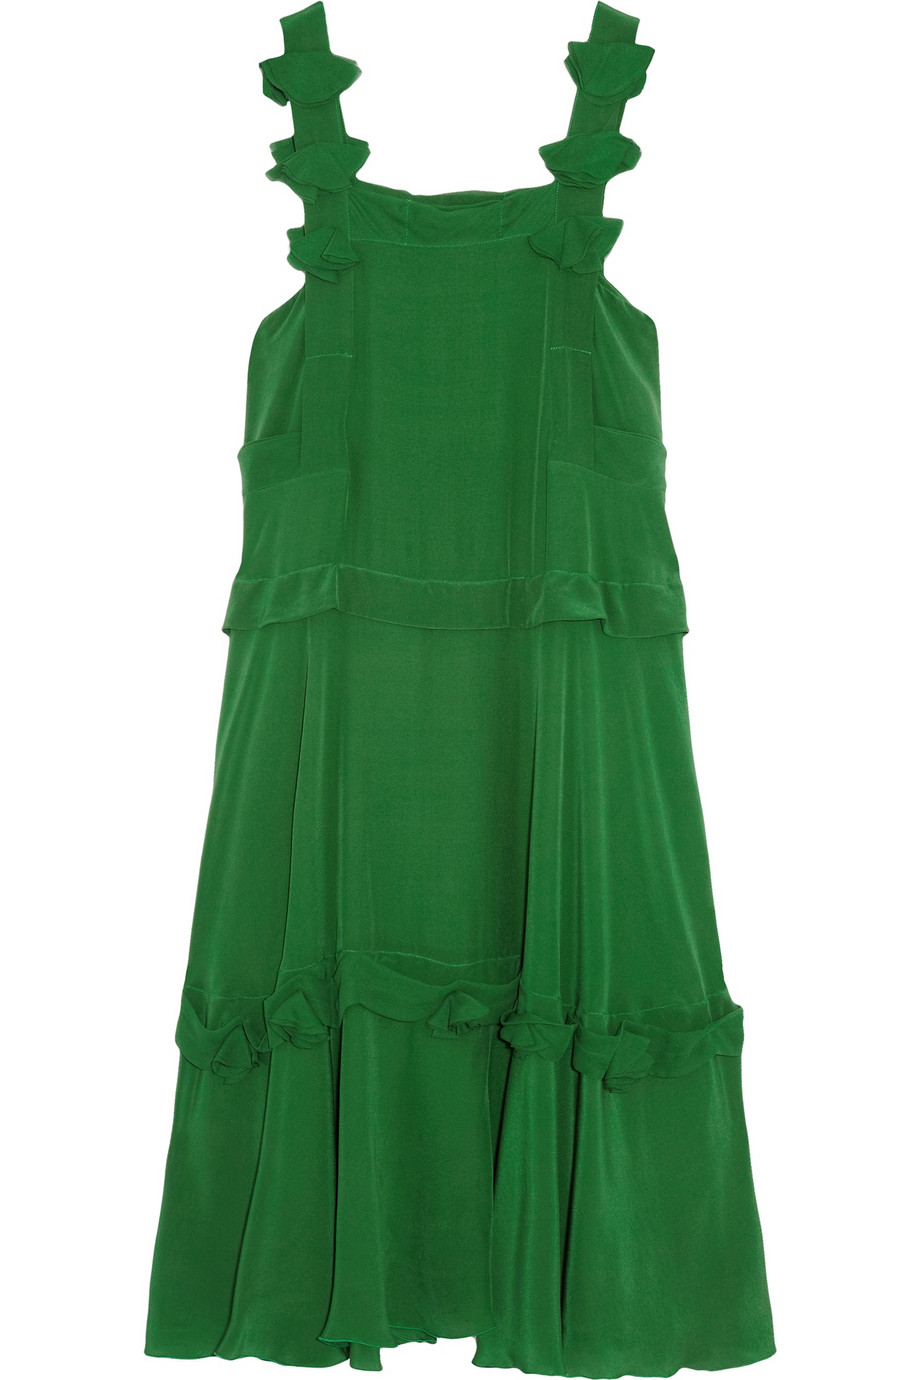 See by chloé Tiered Silk Dress in Green | Lyst